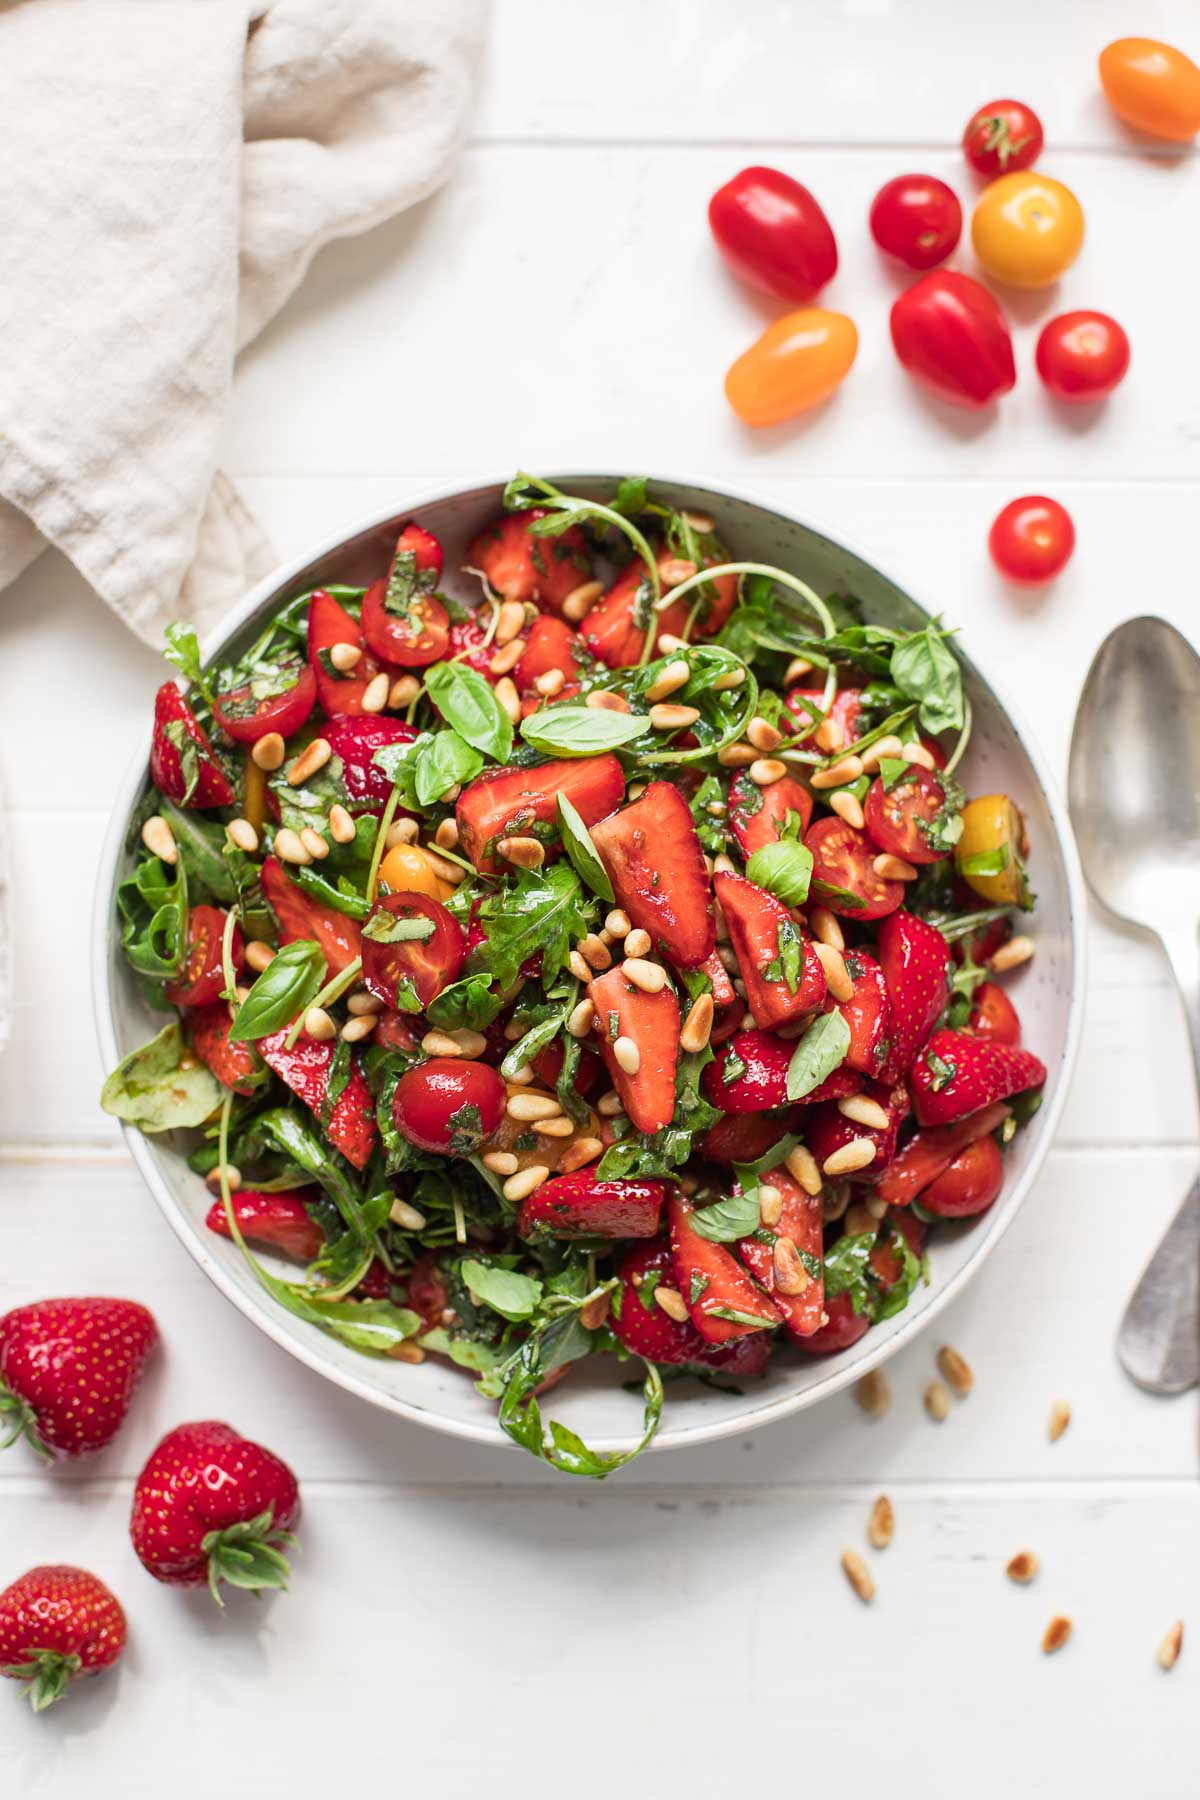 Salad with Strawberries, Tomatoes, Mint & Basil